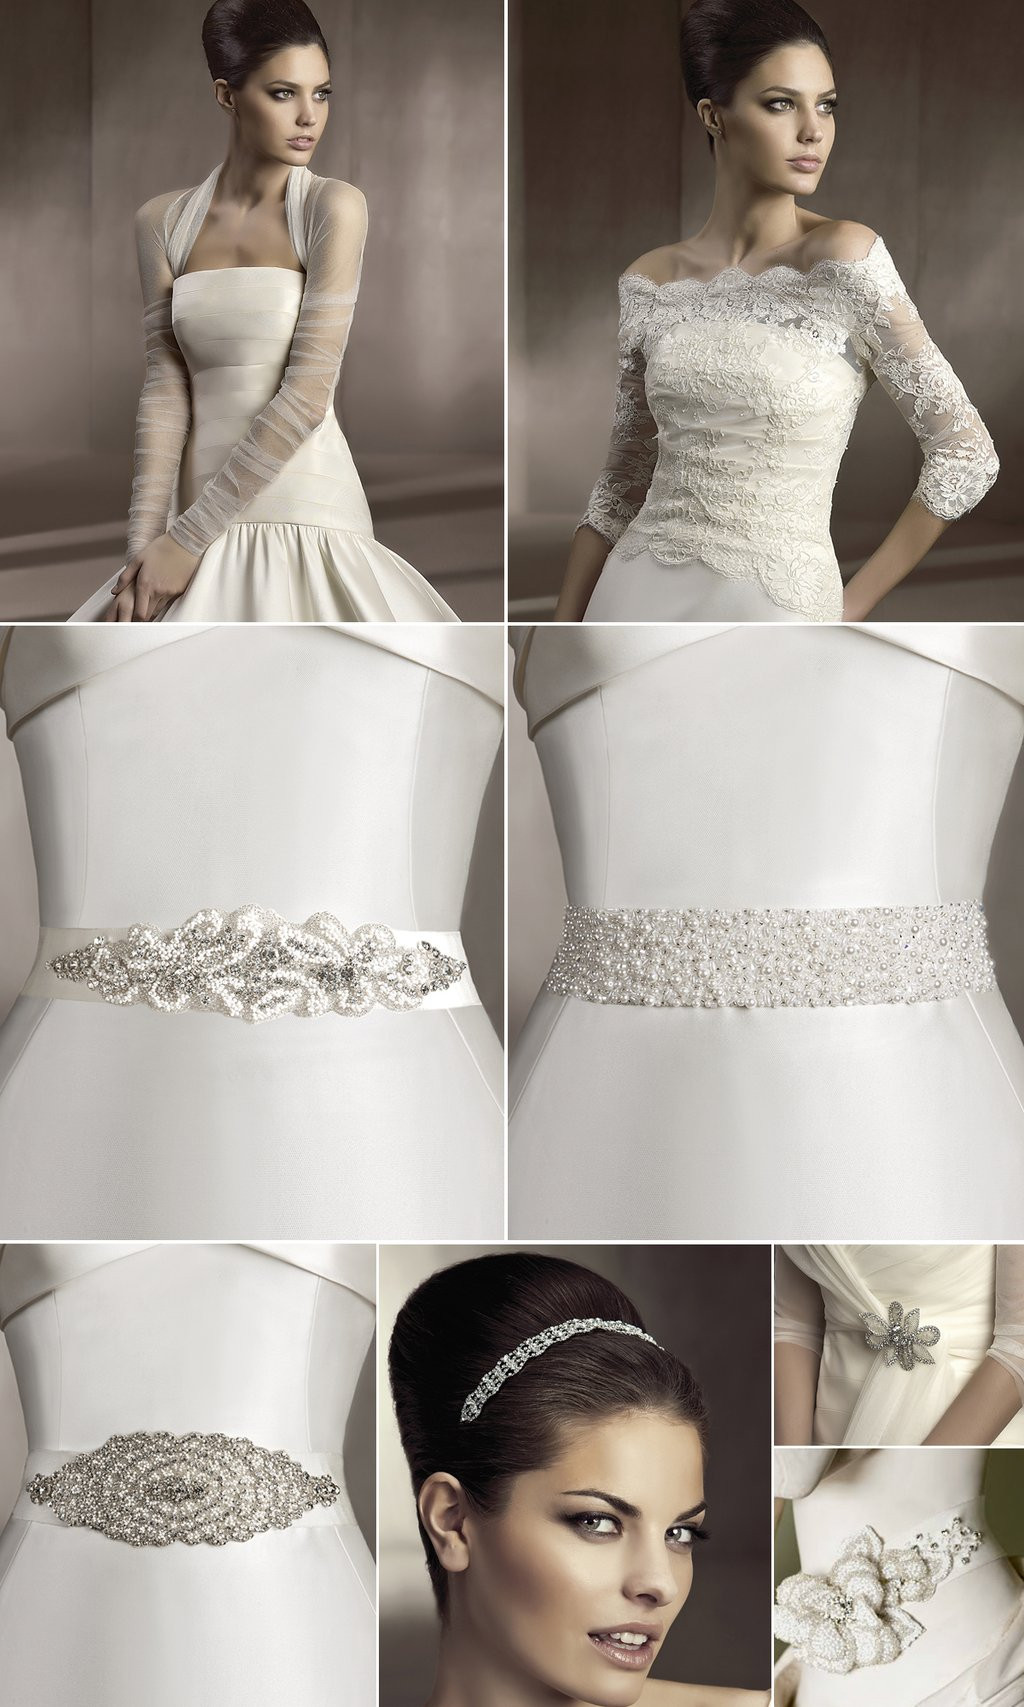 Wedding Gown Sashes
 2012 bridal hair accessories and wedding dress sashes by